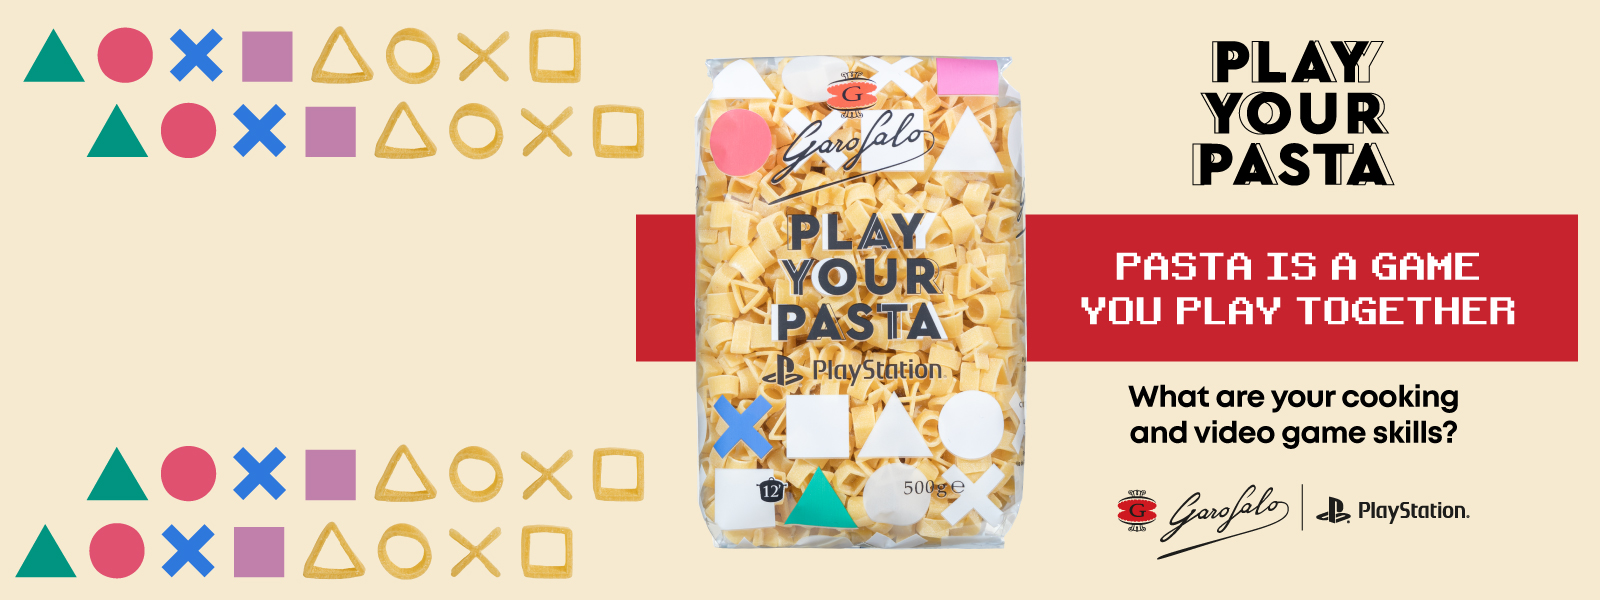 Pasta Garofalo and Playstation® celebrate passion for cooking and video games together.